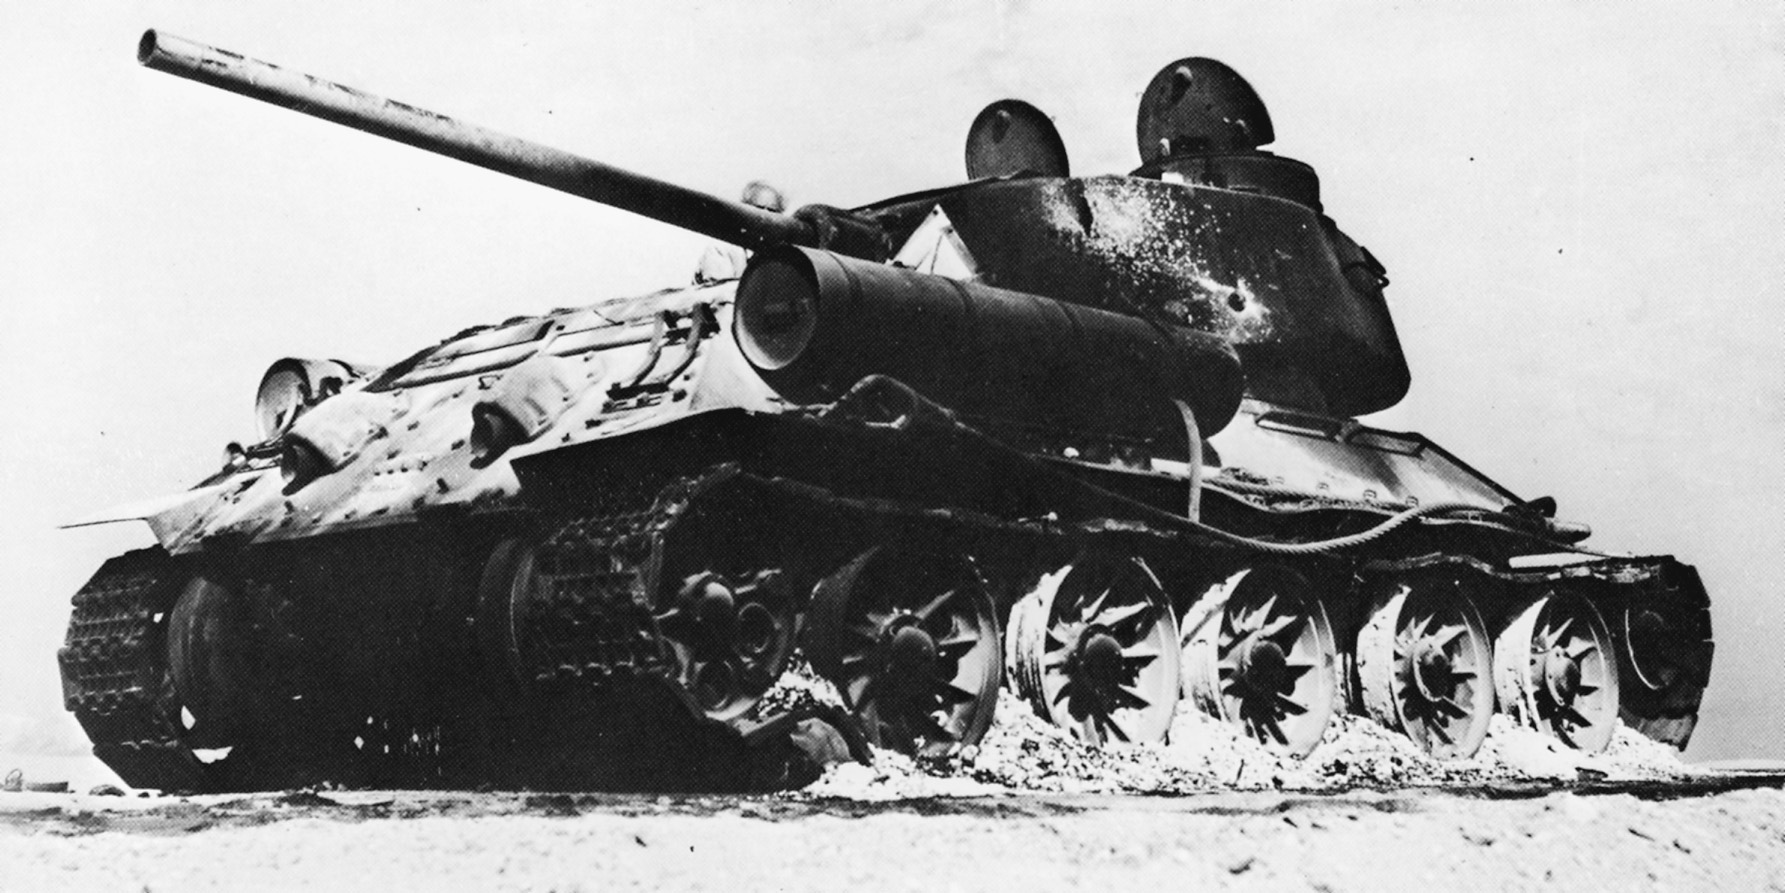 A burnt-out T34 tank stands testament to the fierce combat in the Sinai.